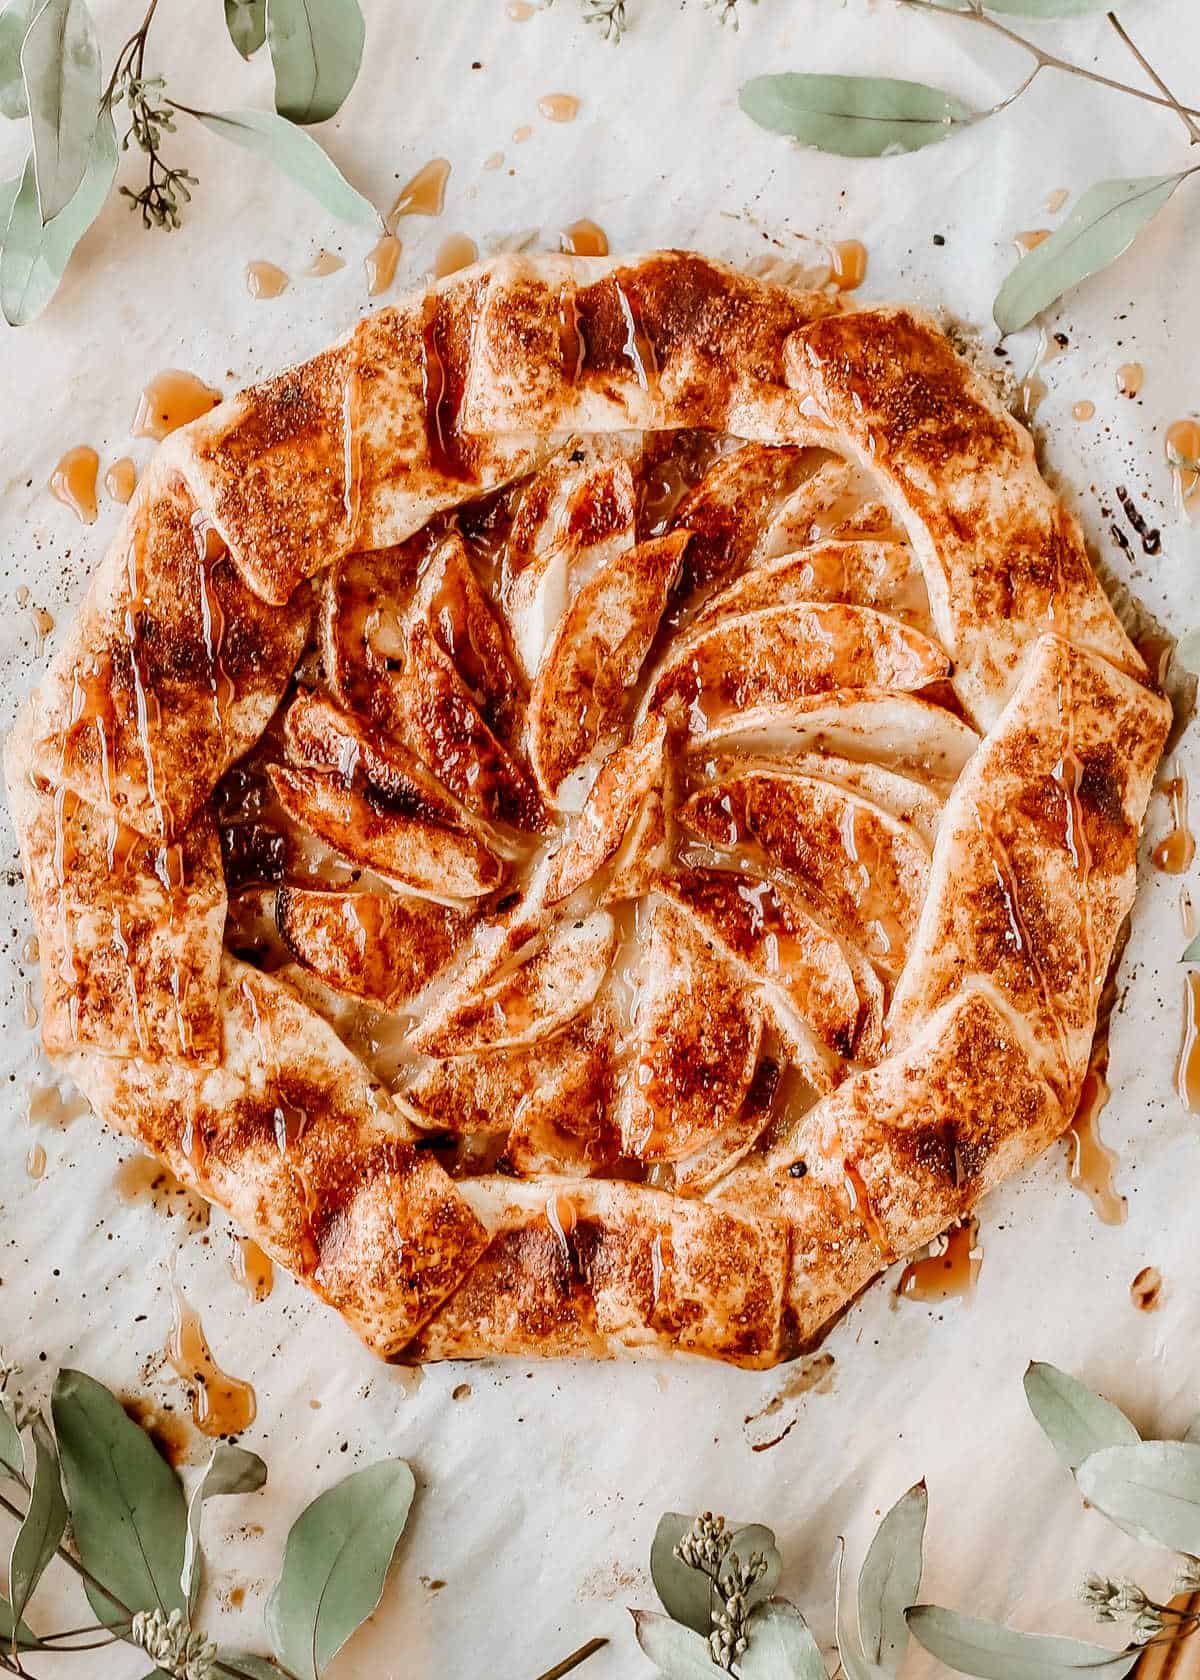 galette dessert with apples and cinnamon, overhead view.